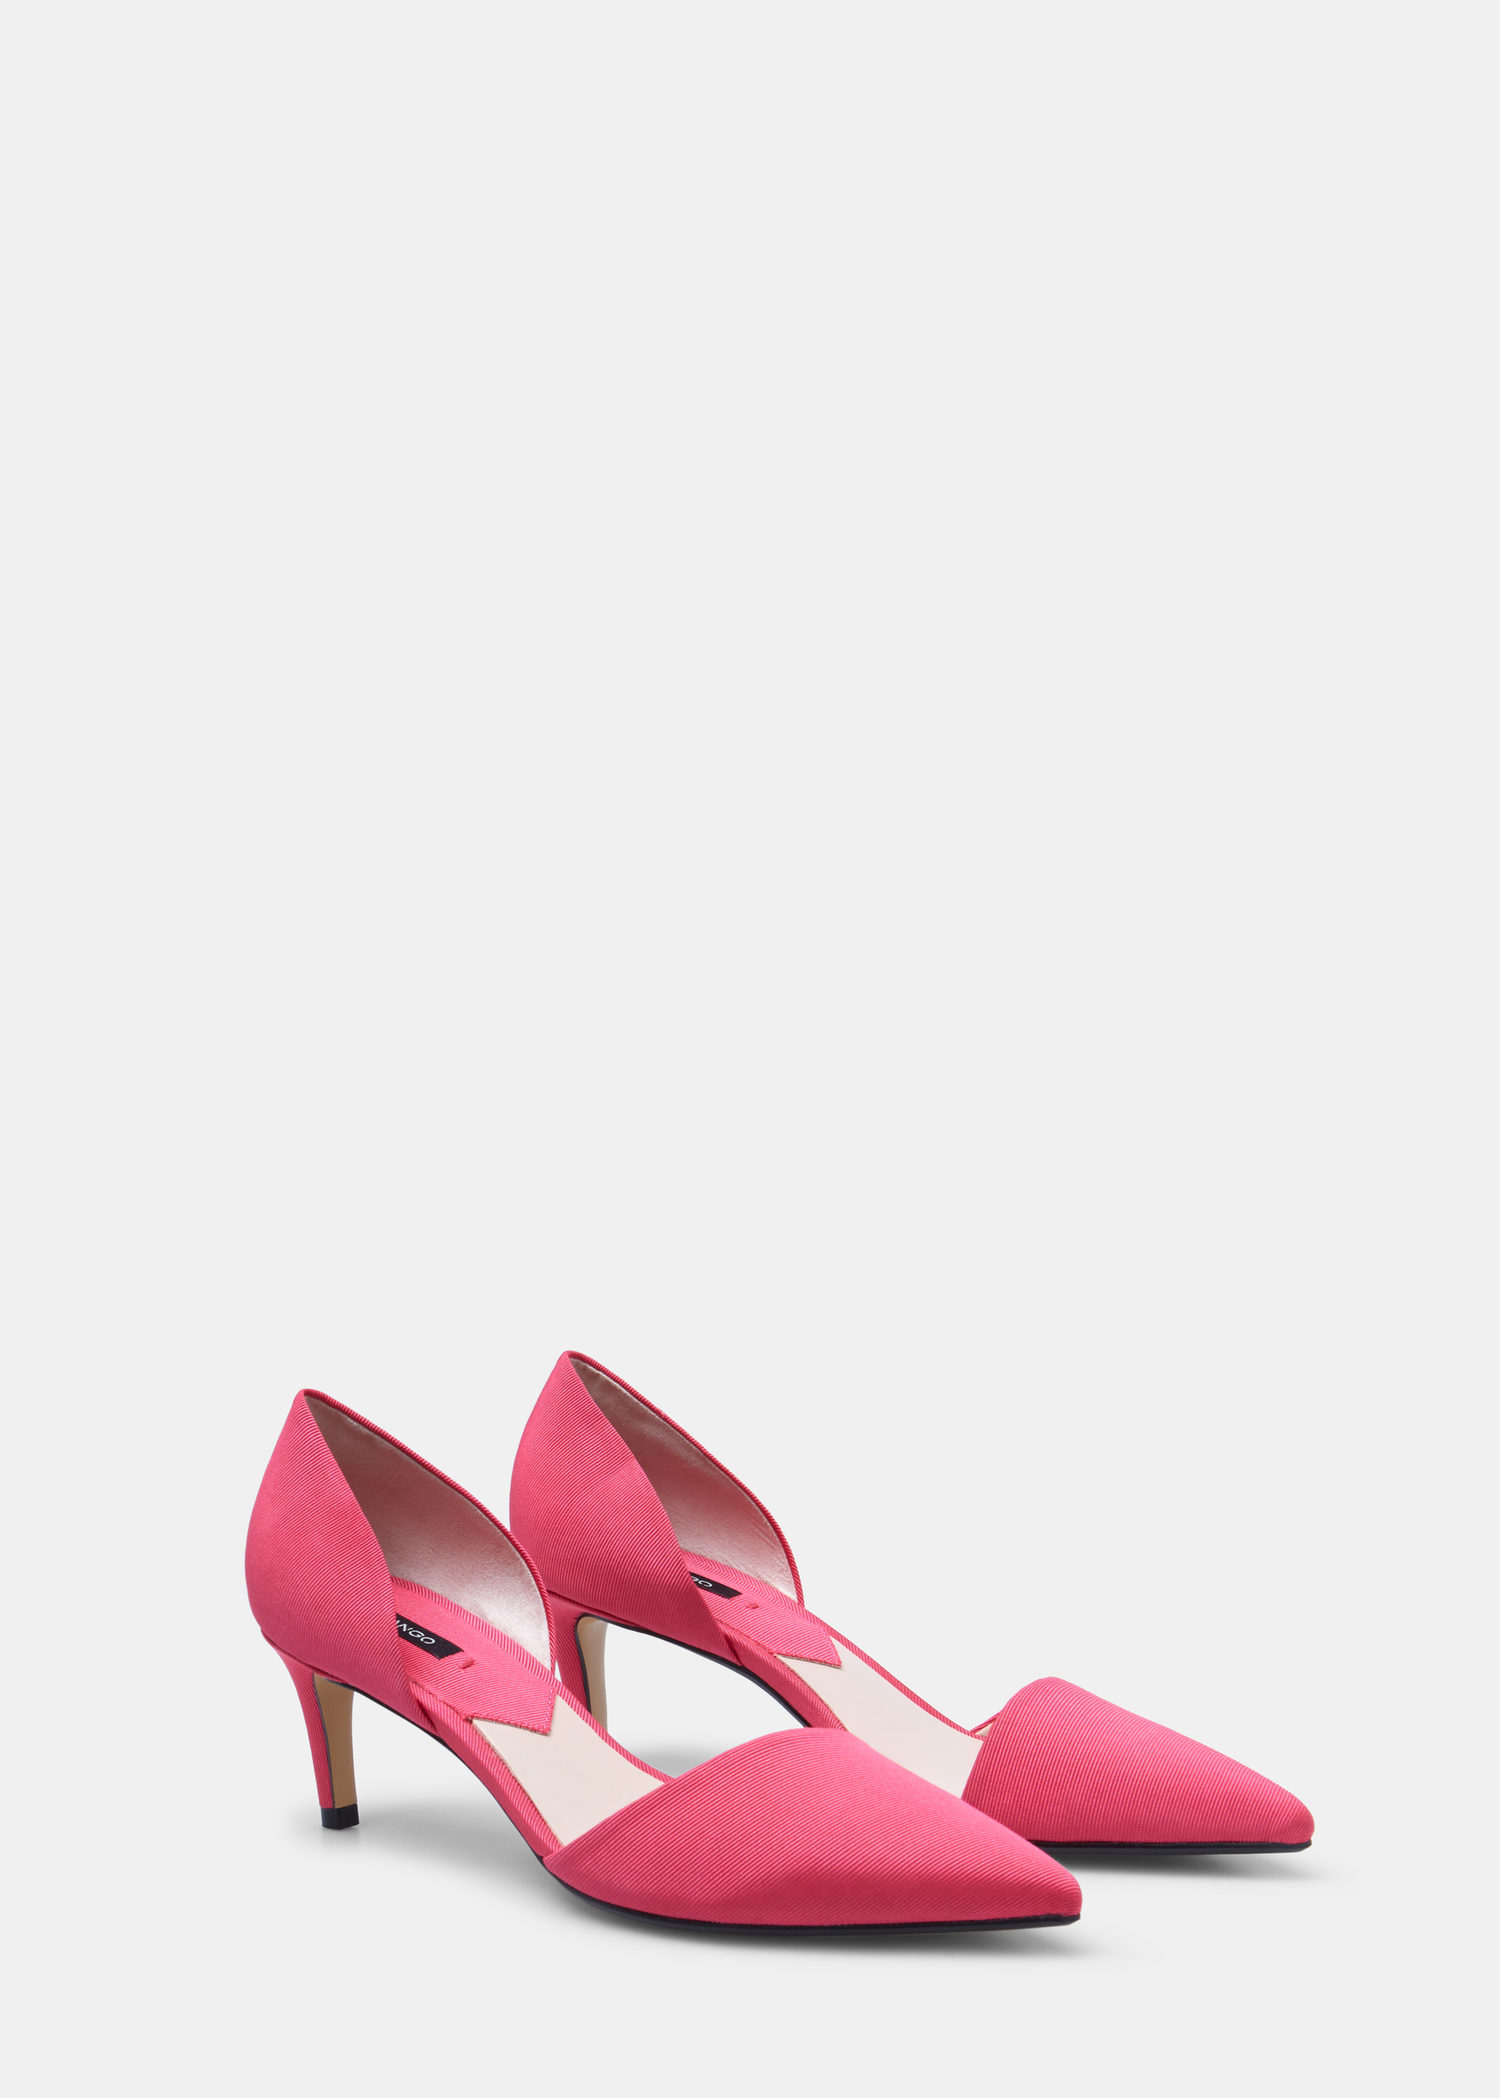 Lyst - Mango Pointed Toe Pumps in Pink